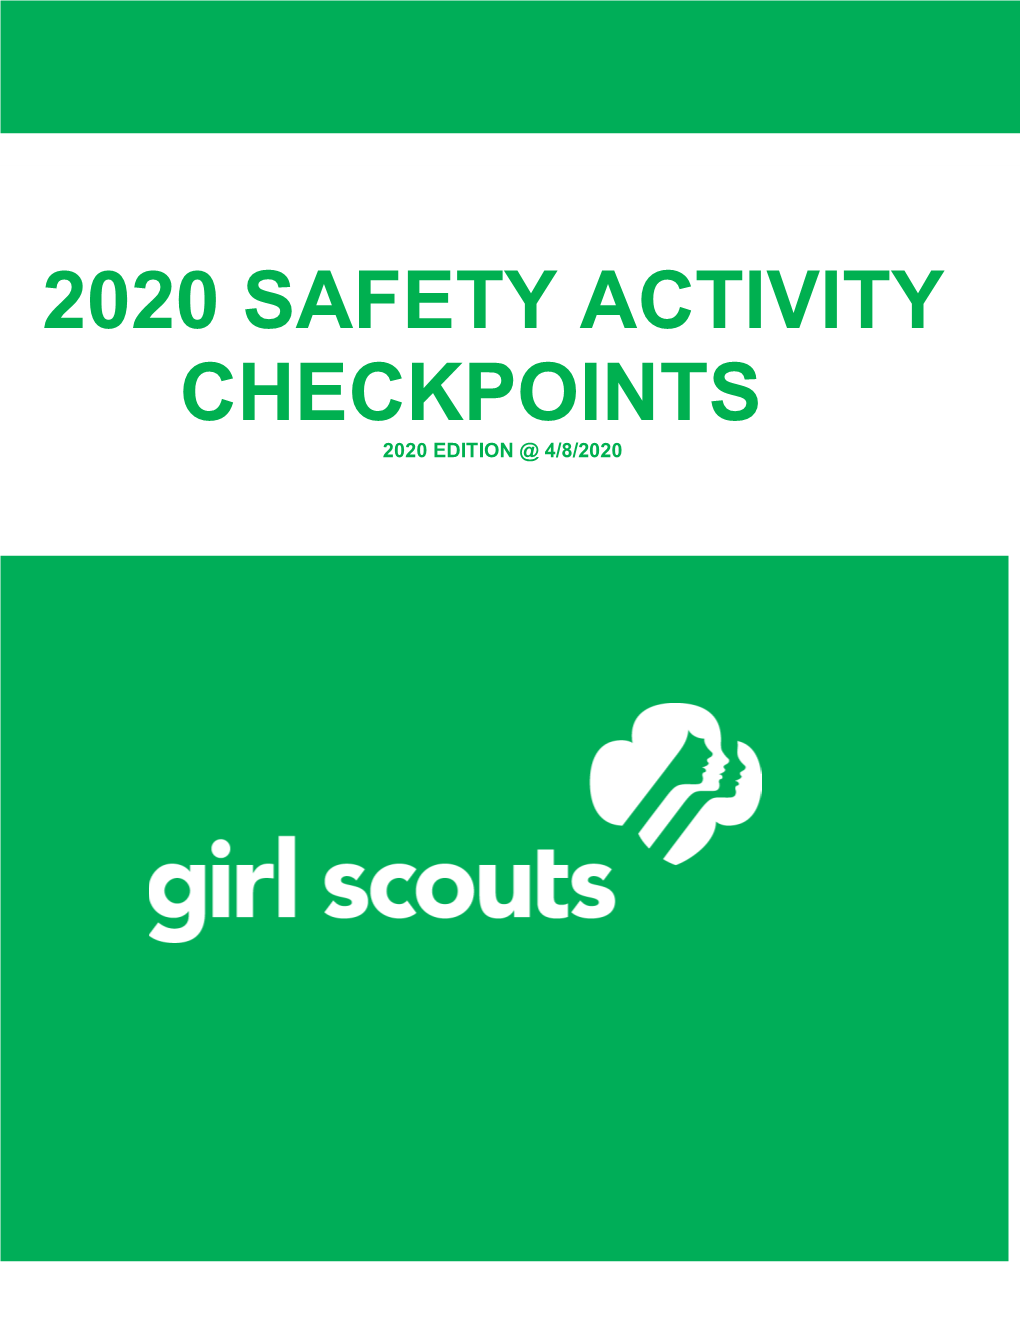 Safety Activity Checkpoints 2020 Edition @ 4/8/2020